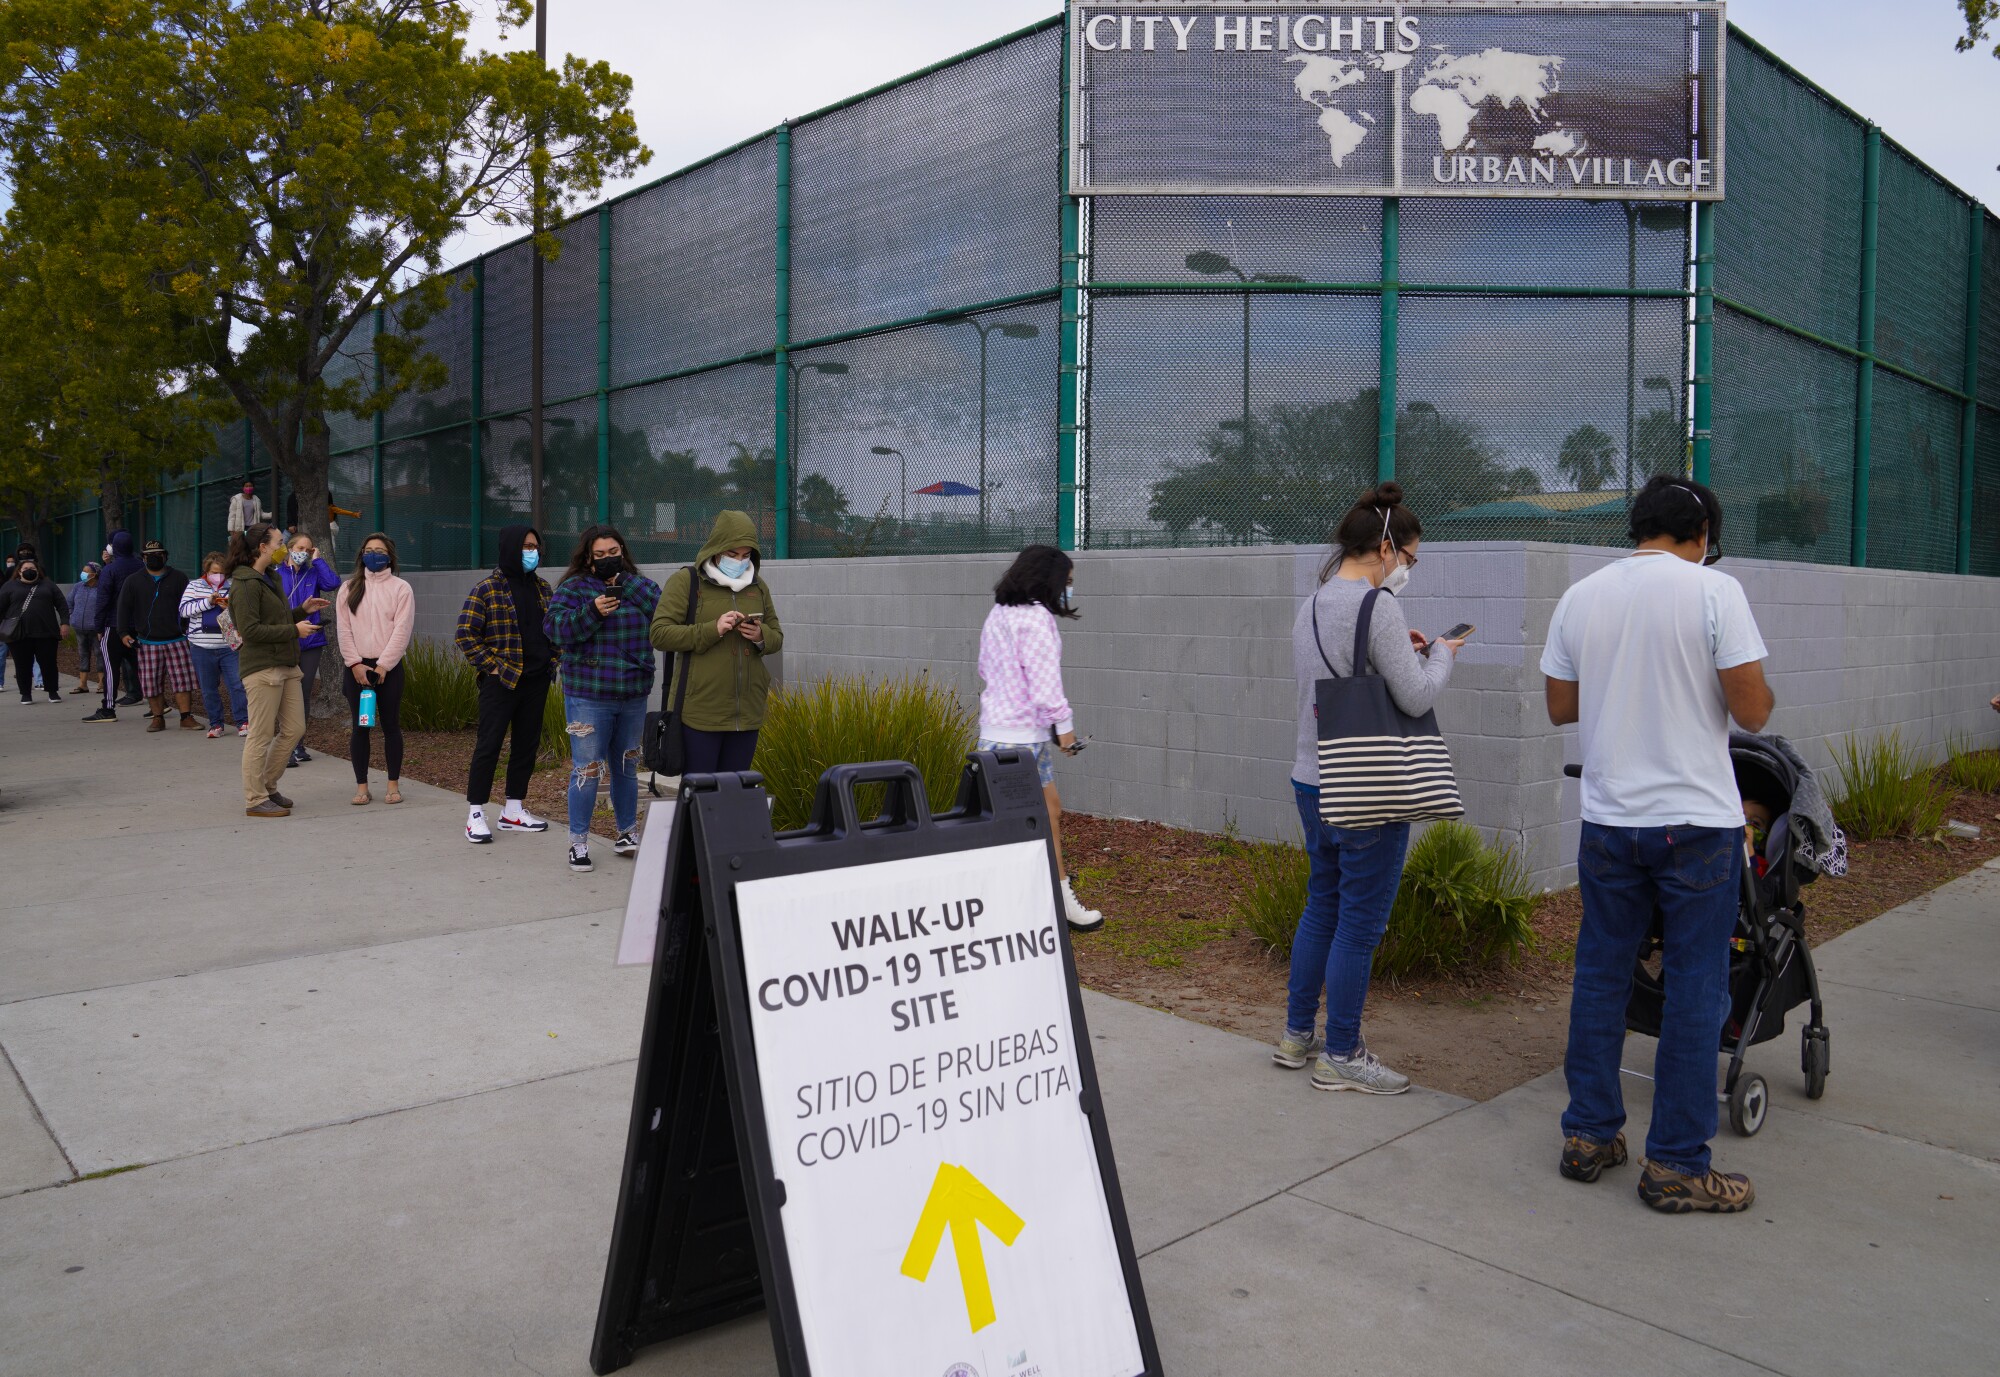 The line for the COVID test site at the City Heights Recreation Center.